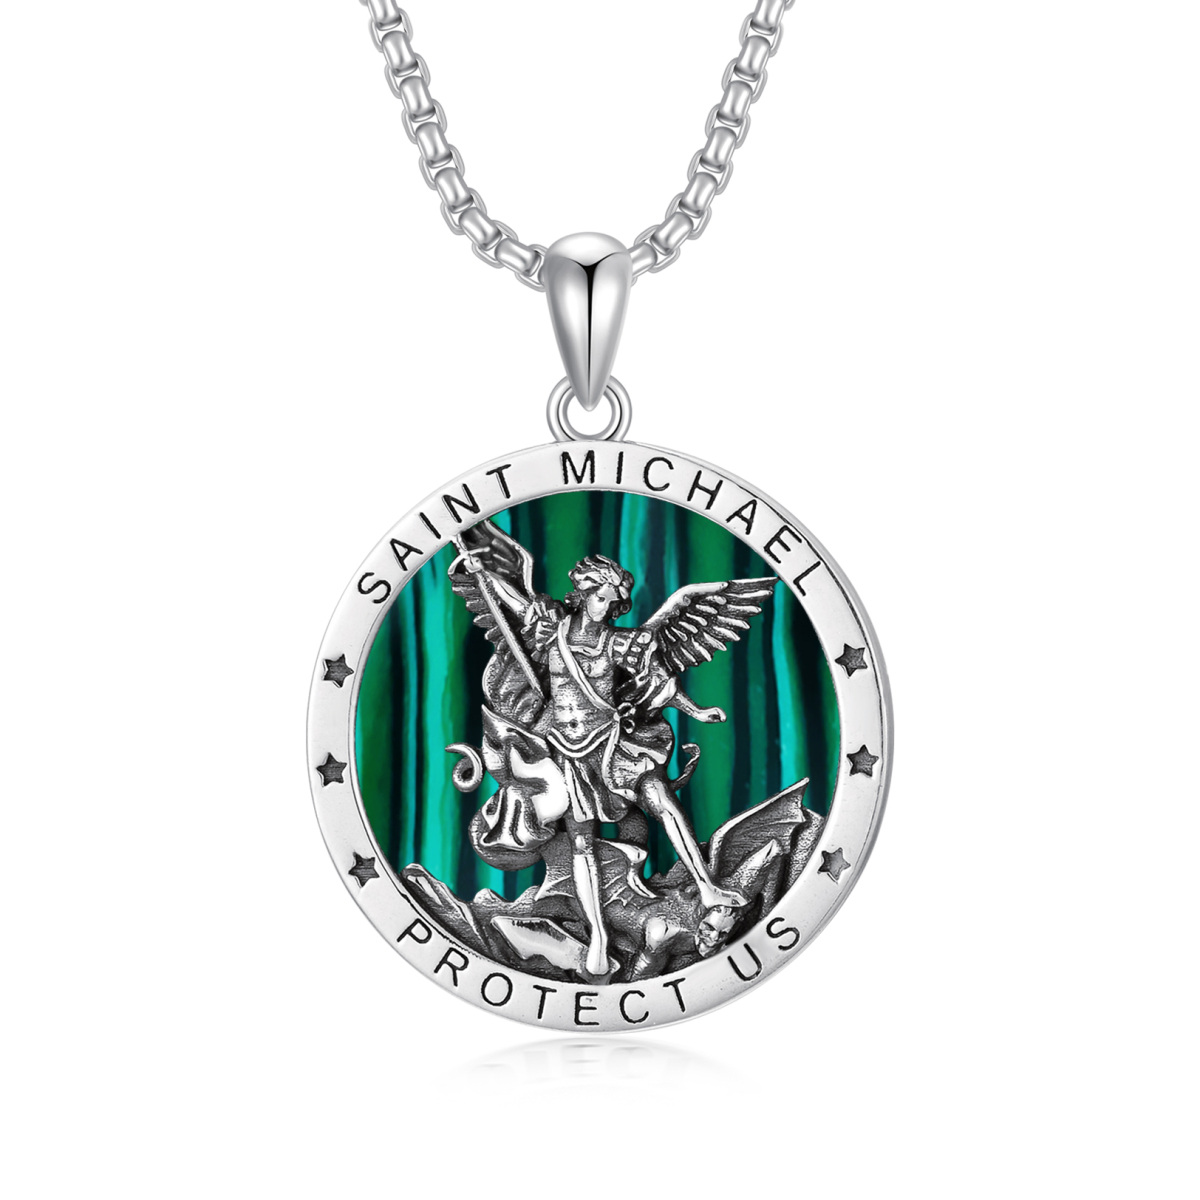 Sterling Silver Circular Shaped Abalone Shellfish Saint Michael Pendant Necklace with Engraved Word for Men-1